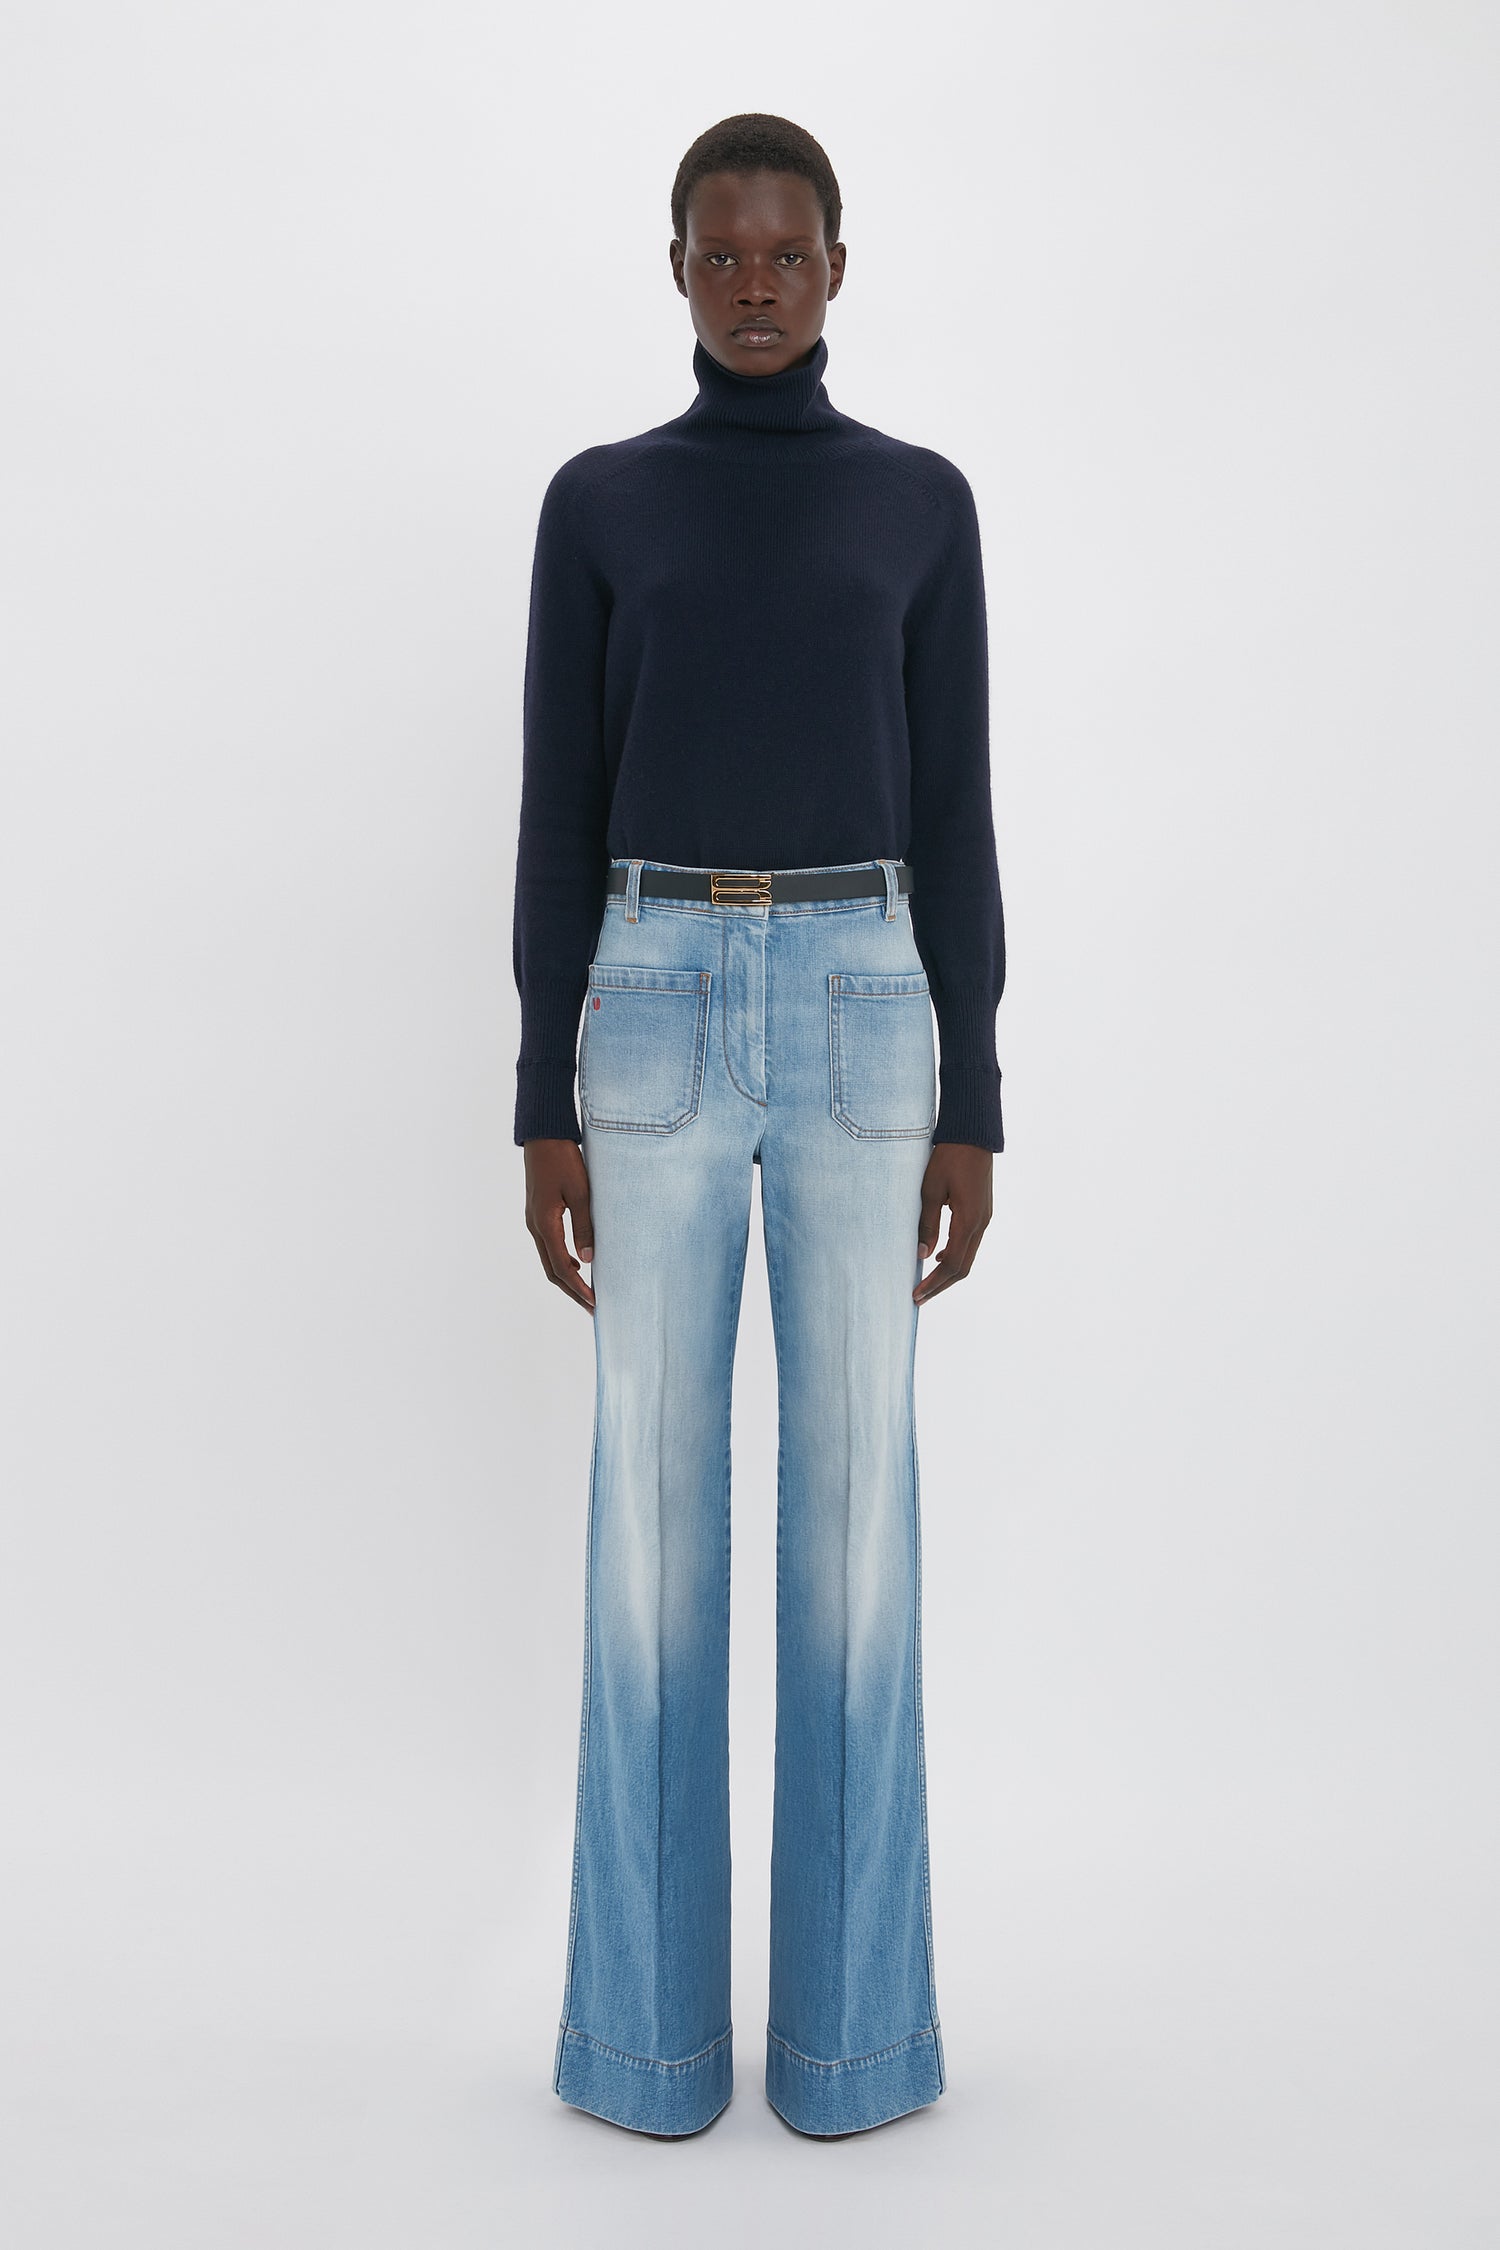 A person stands wearing a dark turtleneck sweater and Victoria Beckham's Alina High Waisted Jean In Light Summer Wash against a plain white background.